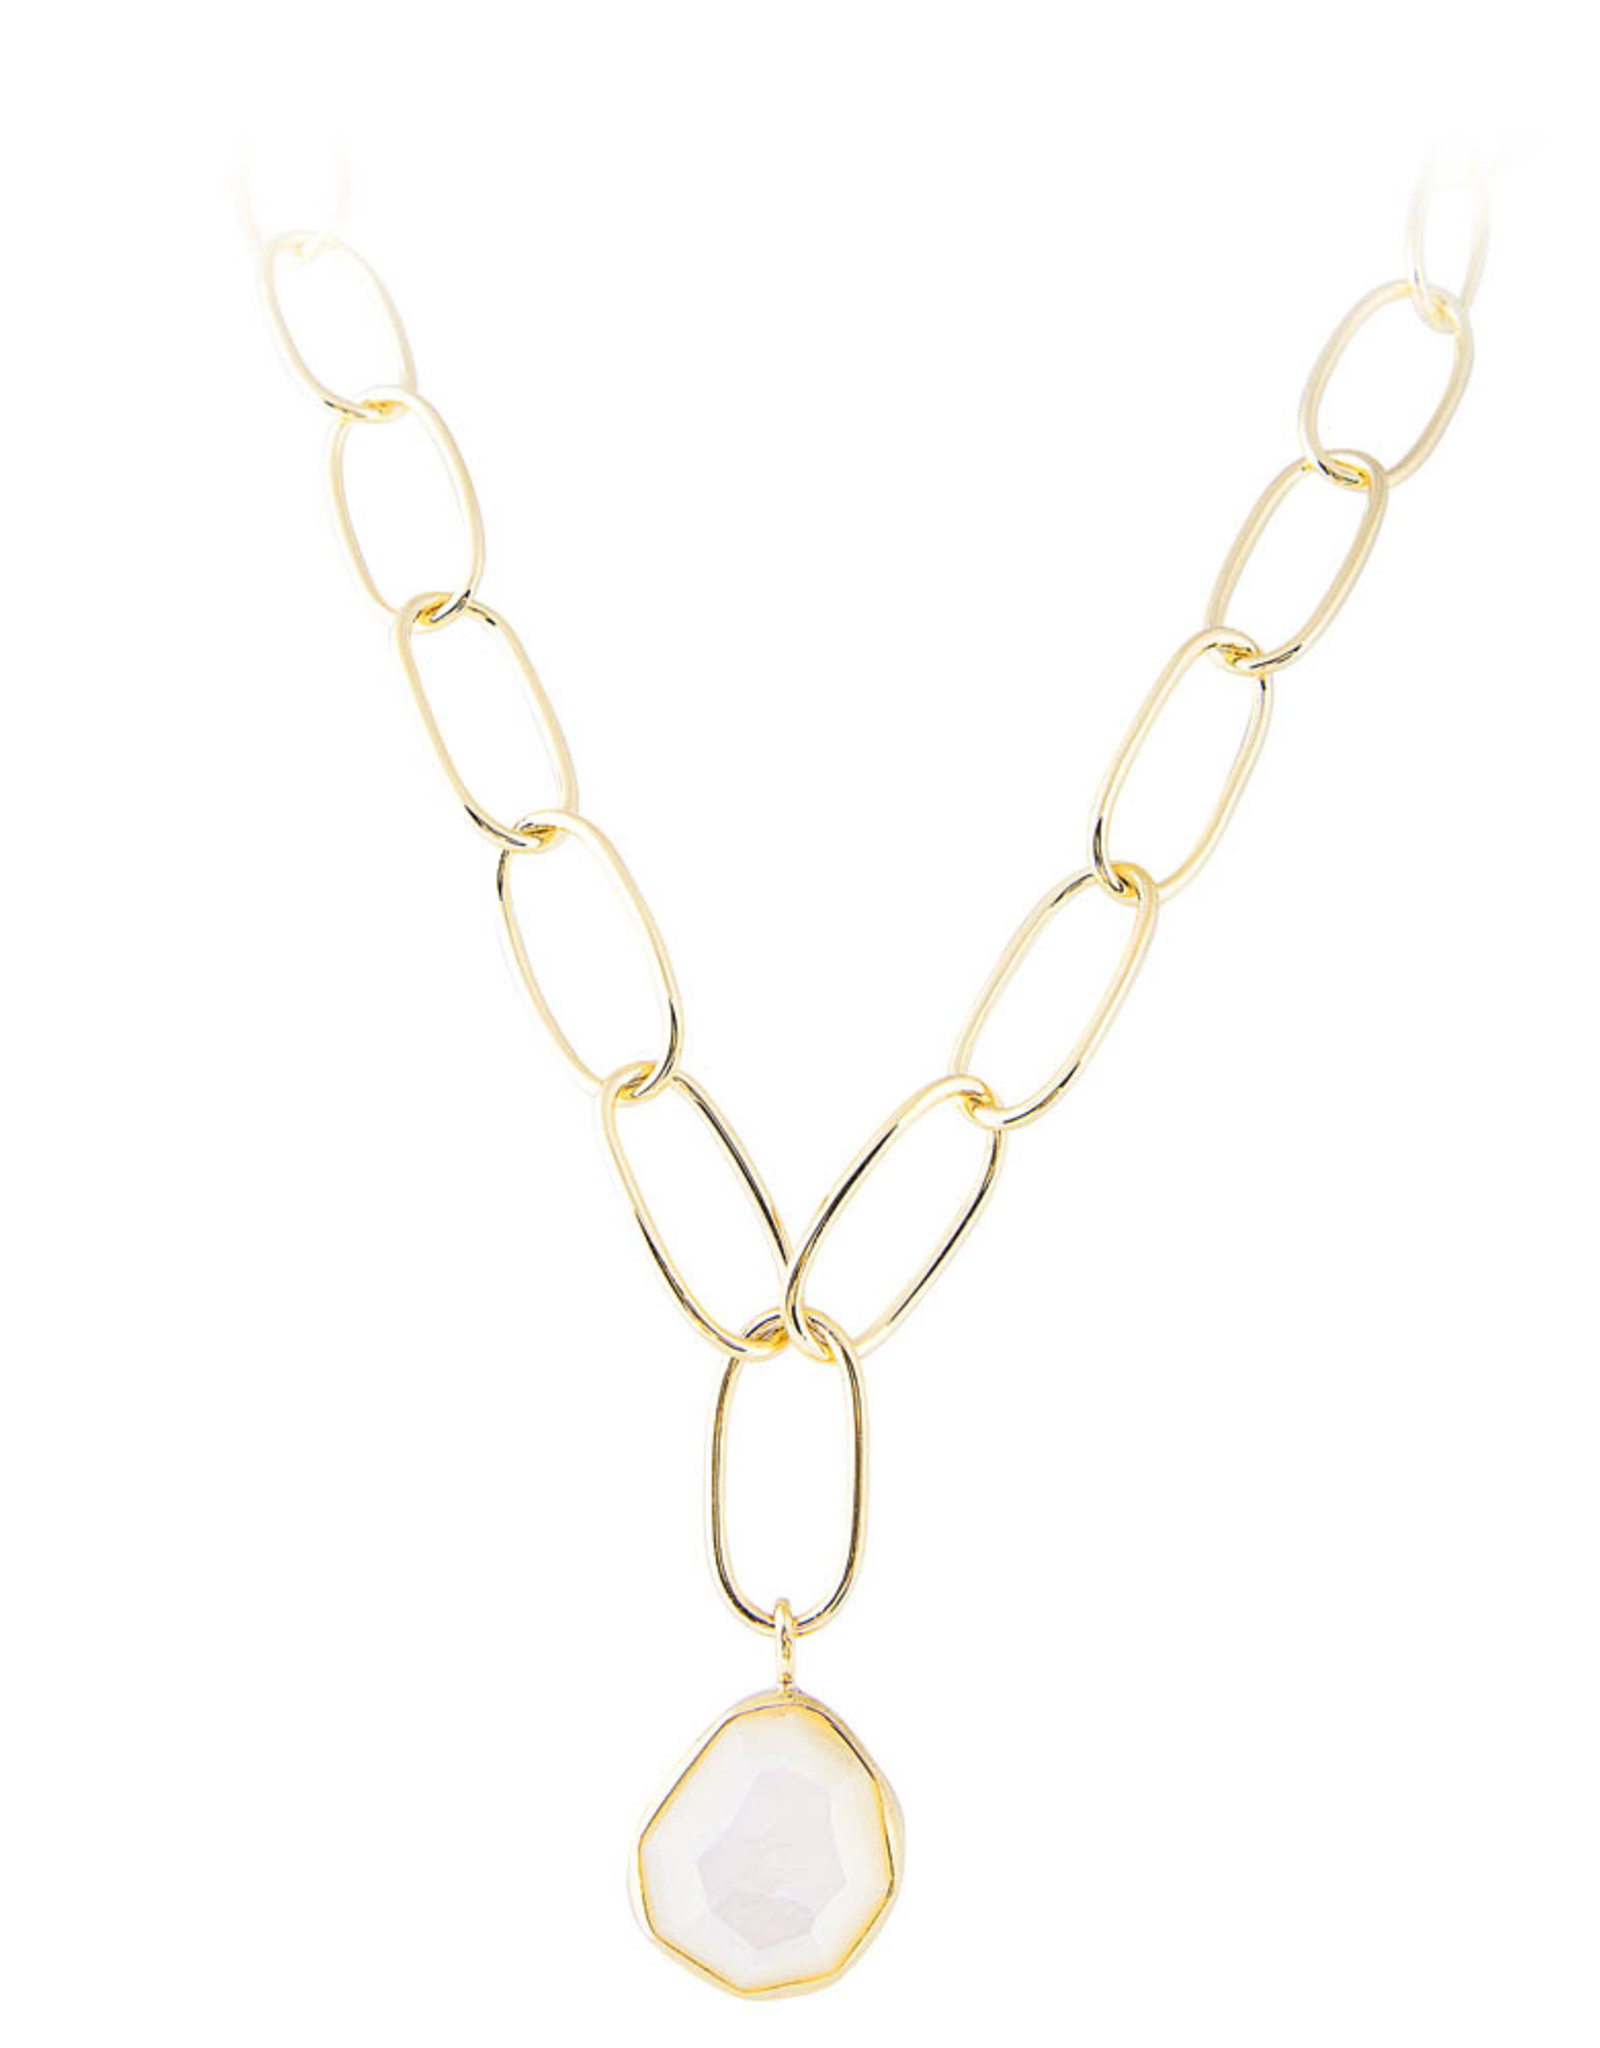 FAIRLEY FREE FORM MOTHER OF PEARL LINK NECKLACE